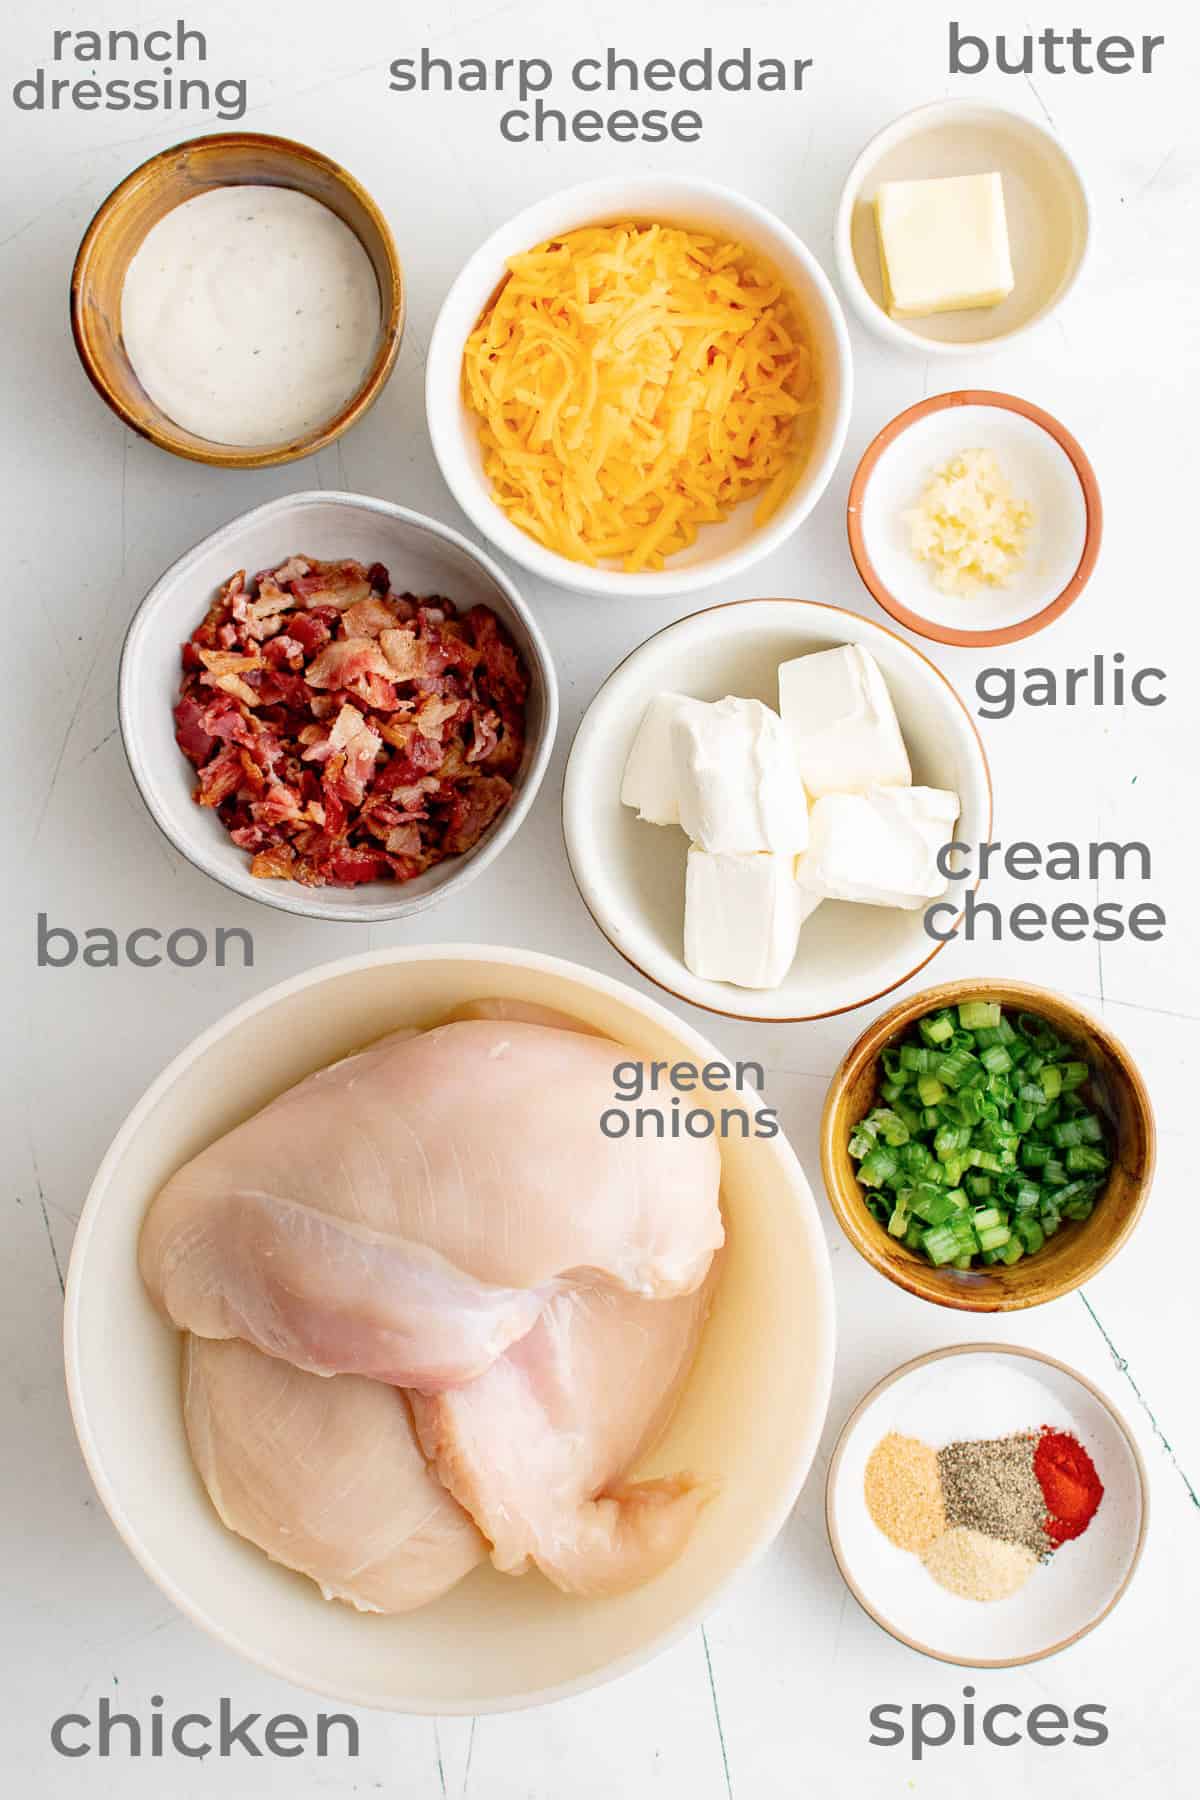 Ingredients laid out in individual bowls to make a stuffed chicken recipe - chicken, bacon, cream cheese, cheddar, ranch dressing, garlic, spices.